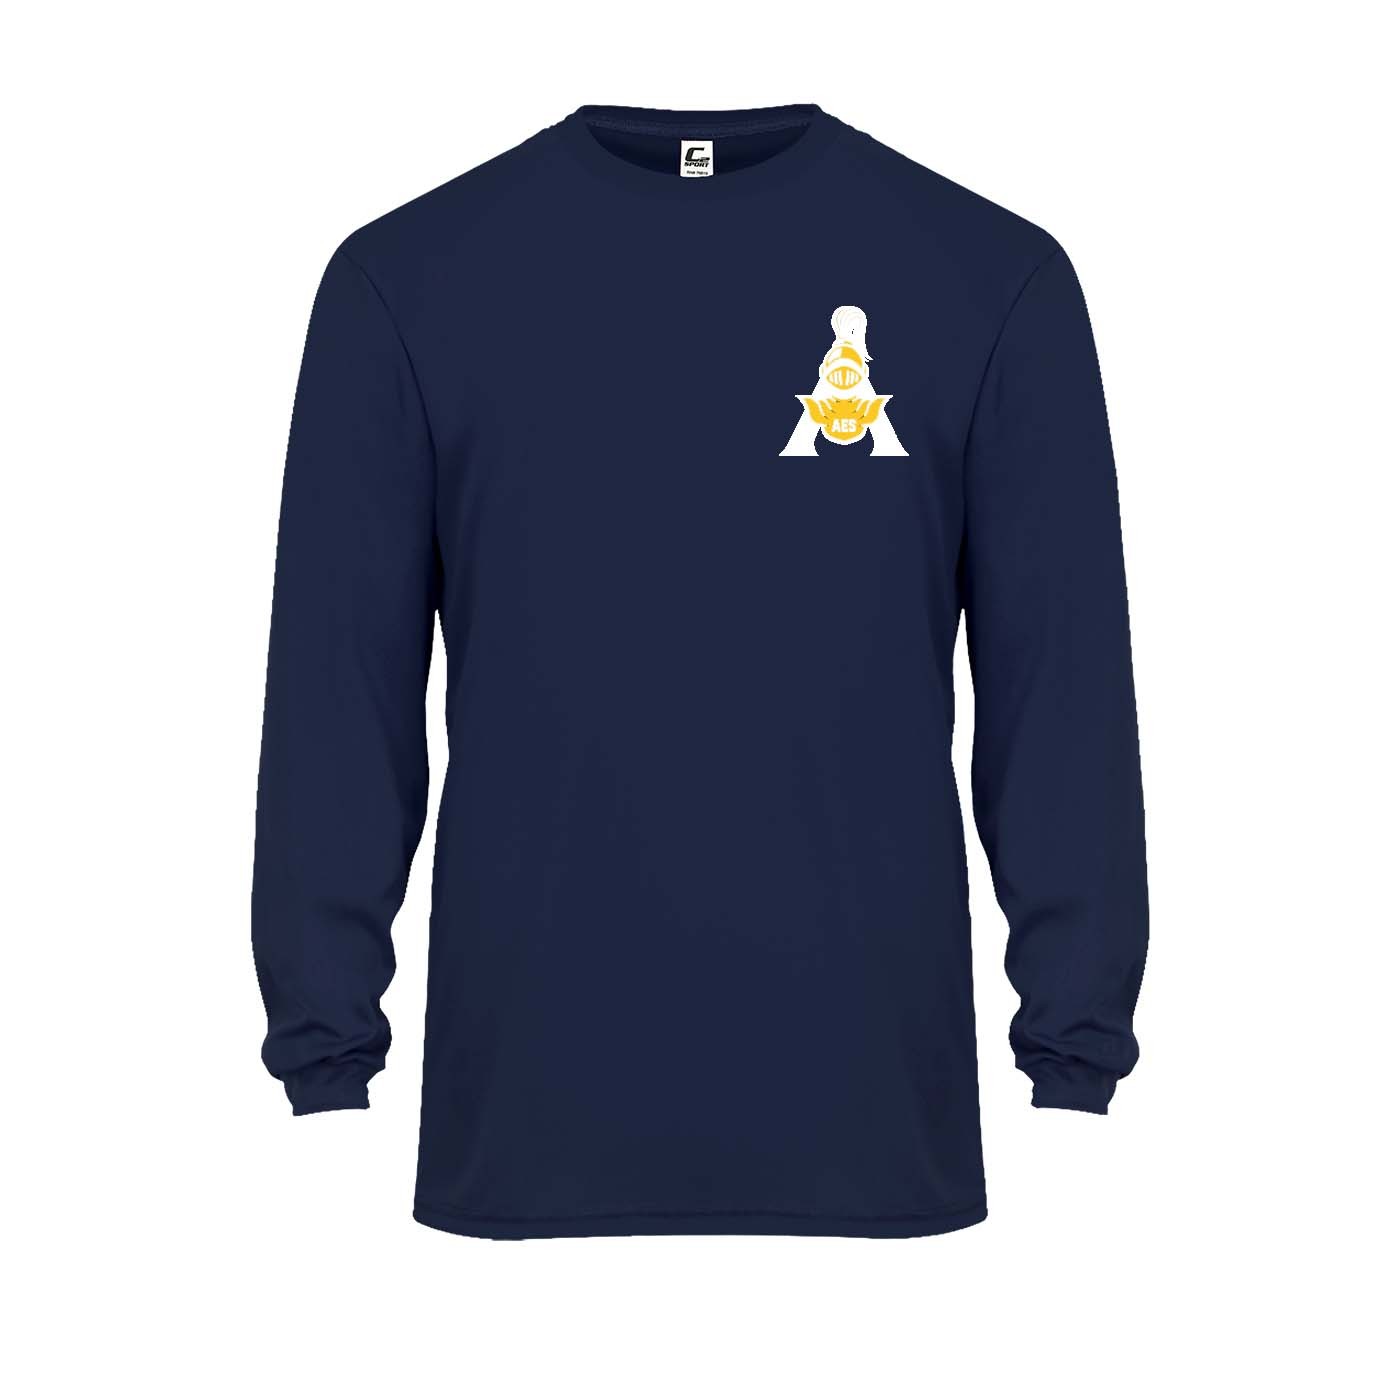 ANN Spirit L/S Performance T-Shirt w/ AES Logo - Please Allow 2-3 Weeks for Delivery